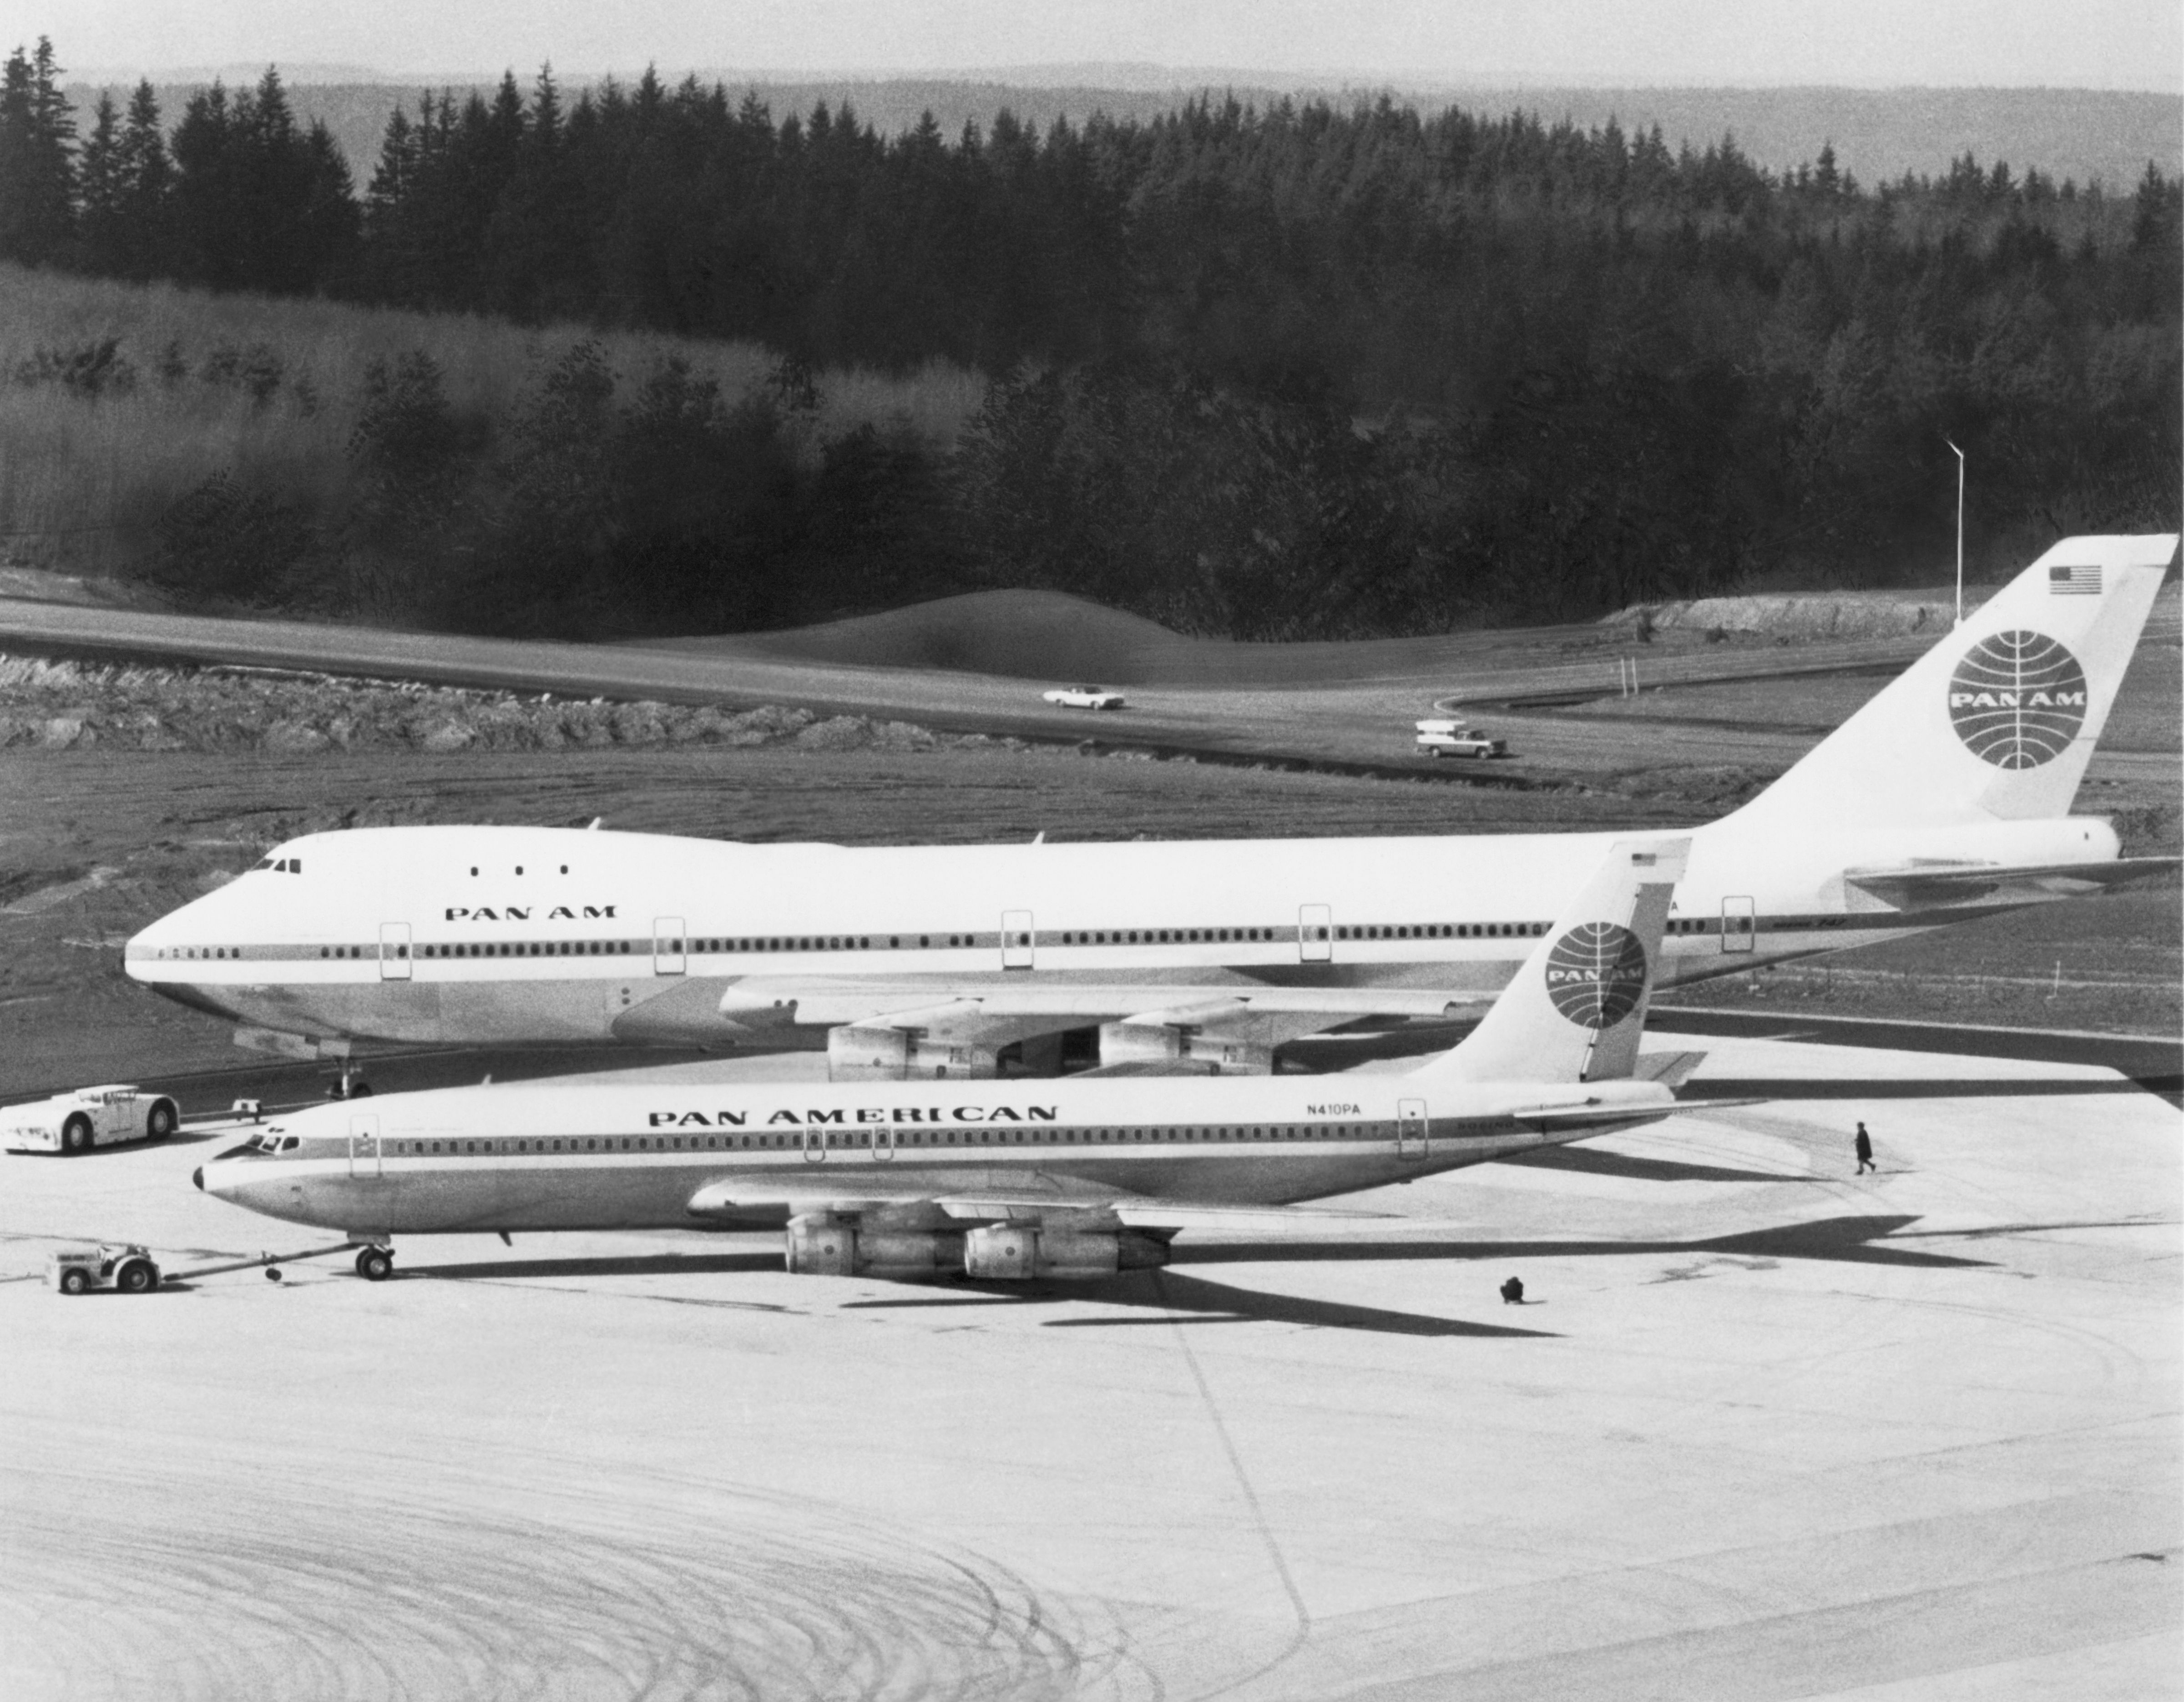 The first Boeing 747 rolls off the production line with Pan Am markings and dwarves a Pan Am Boeing 707-321B sitting in the foreground, Everett, Washington